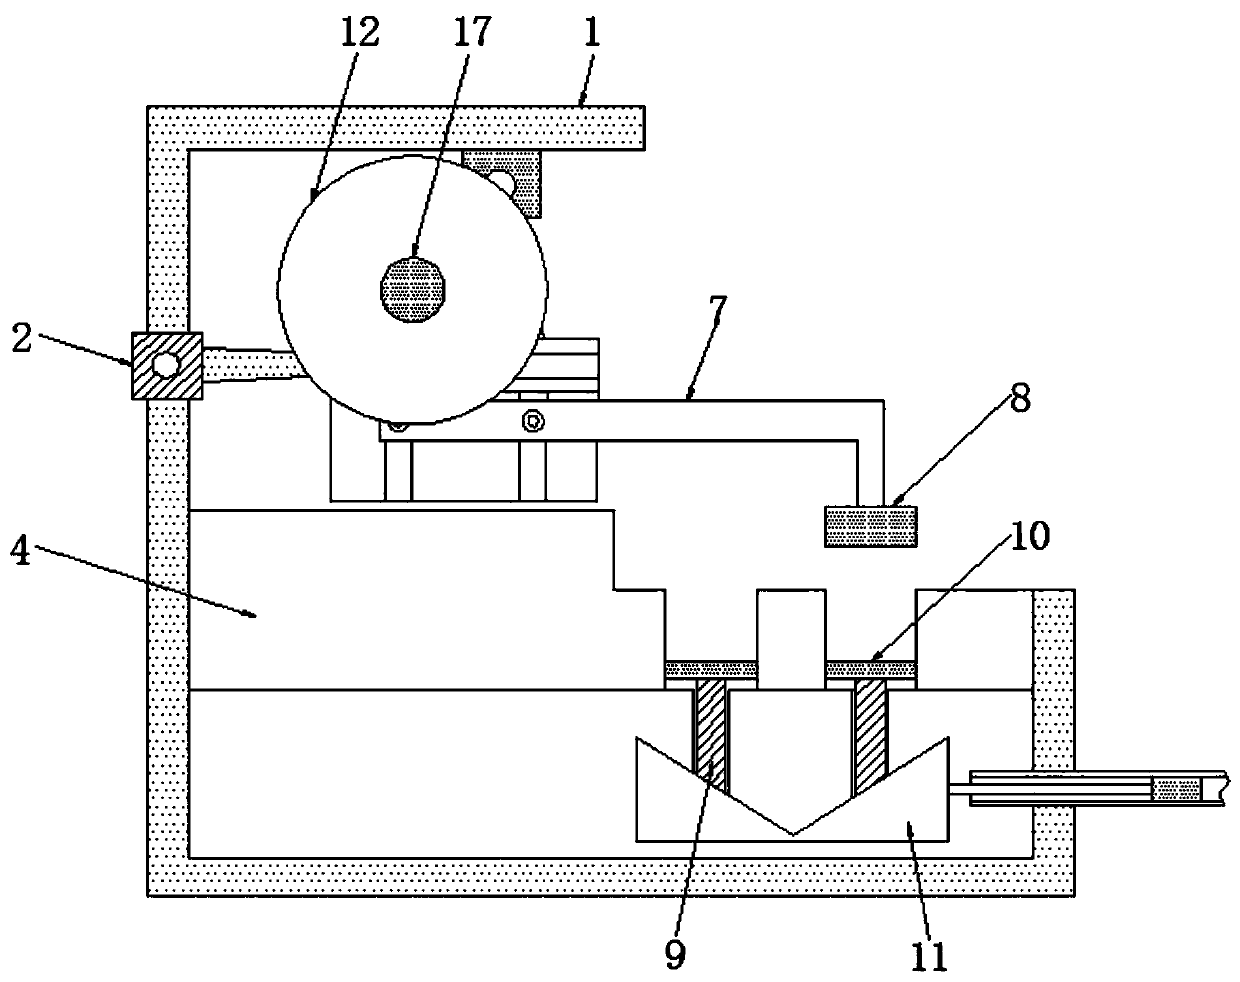 Tea cake making device capable of continuously working and preventing edges from being damaged